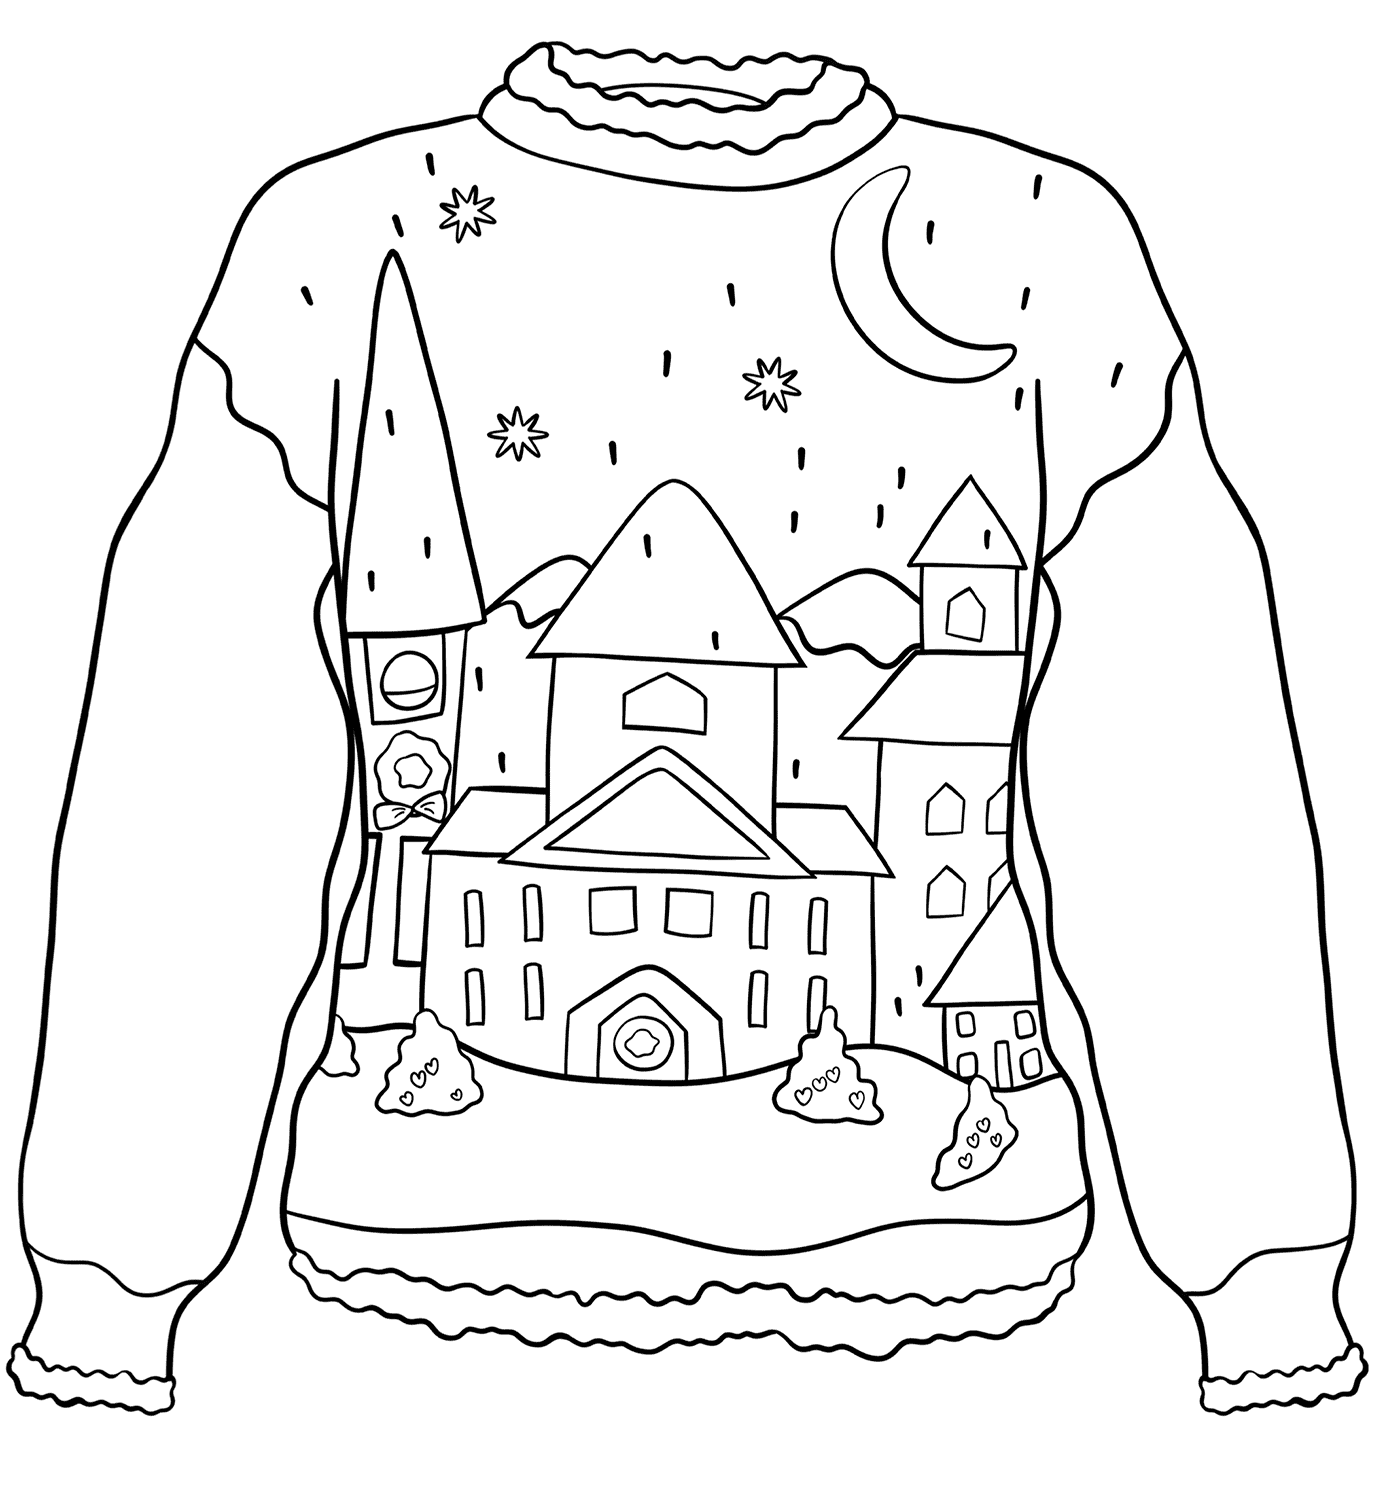 Christmas Sweater with Winter Town Coloring Page